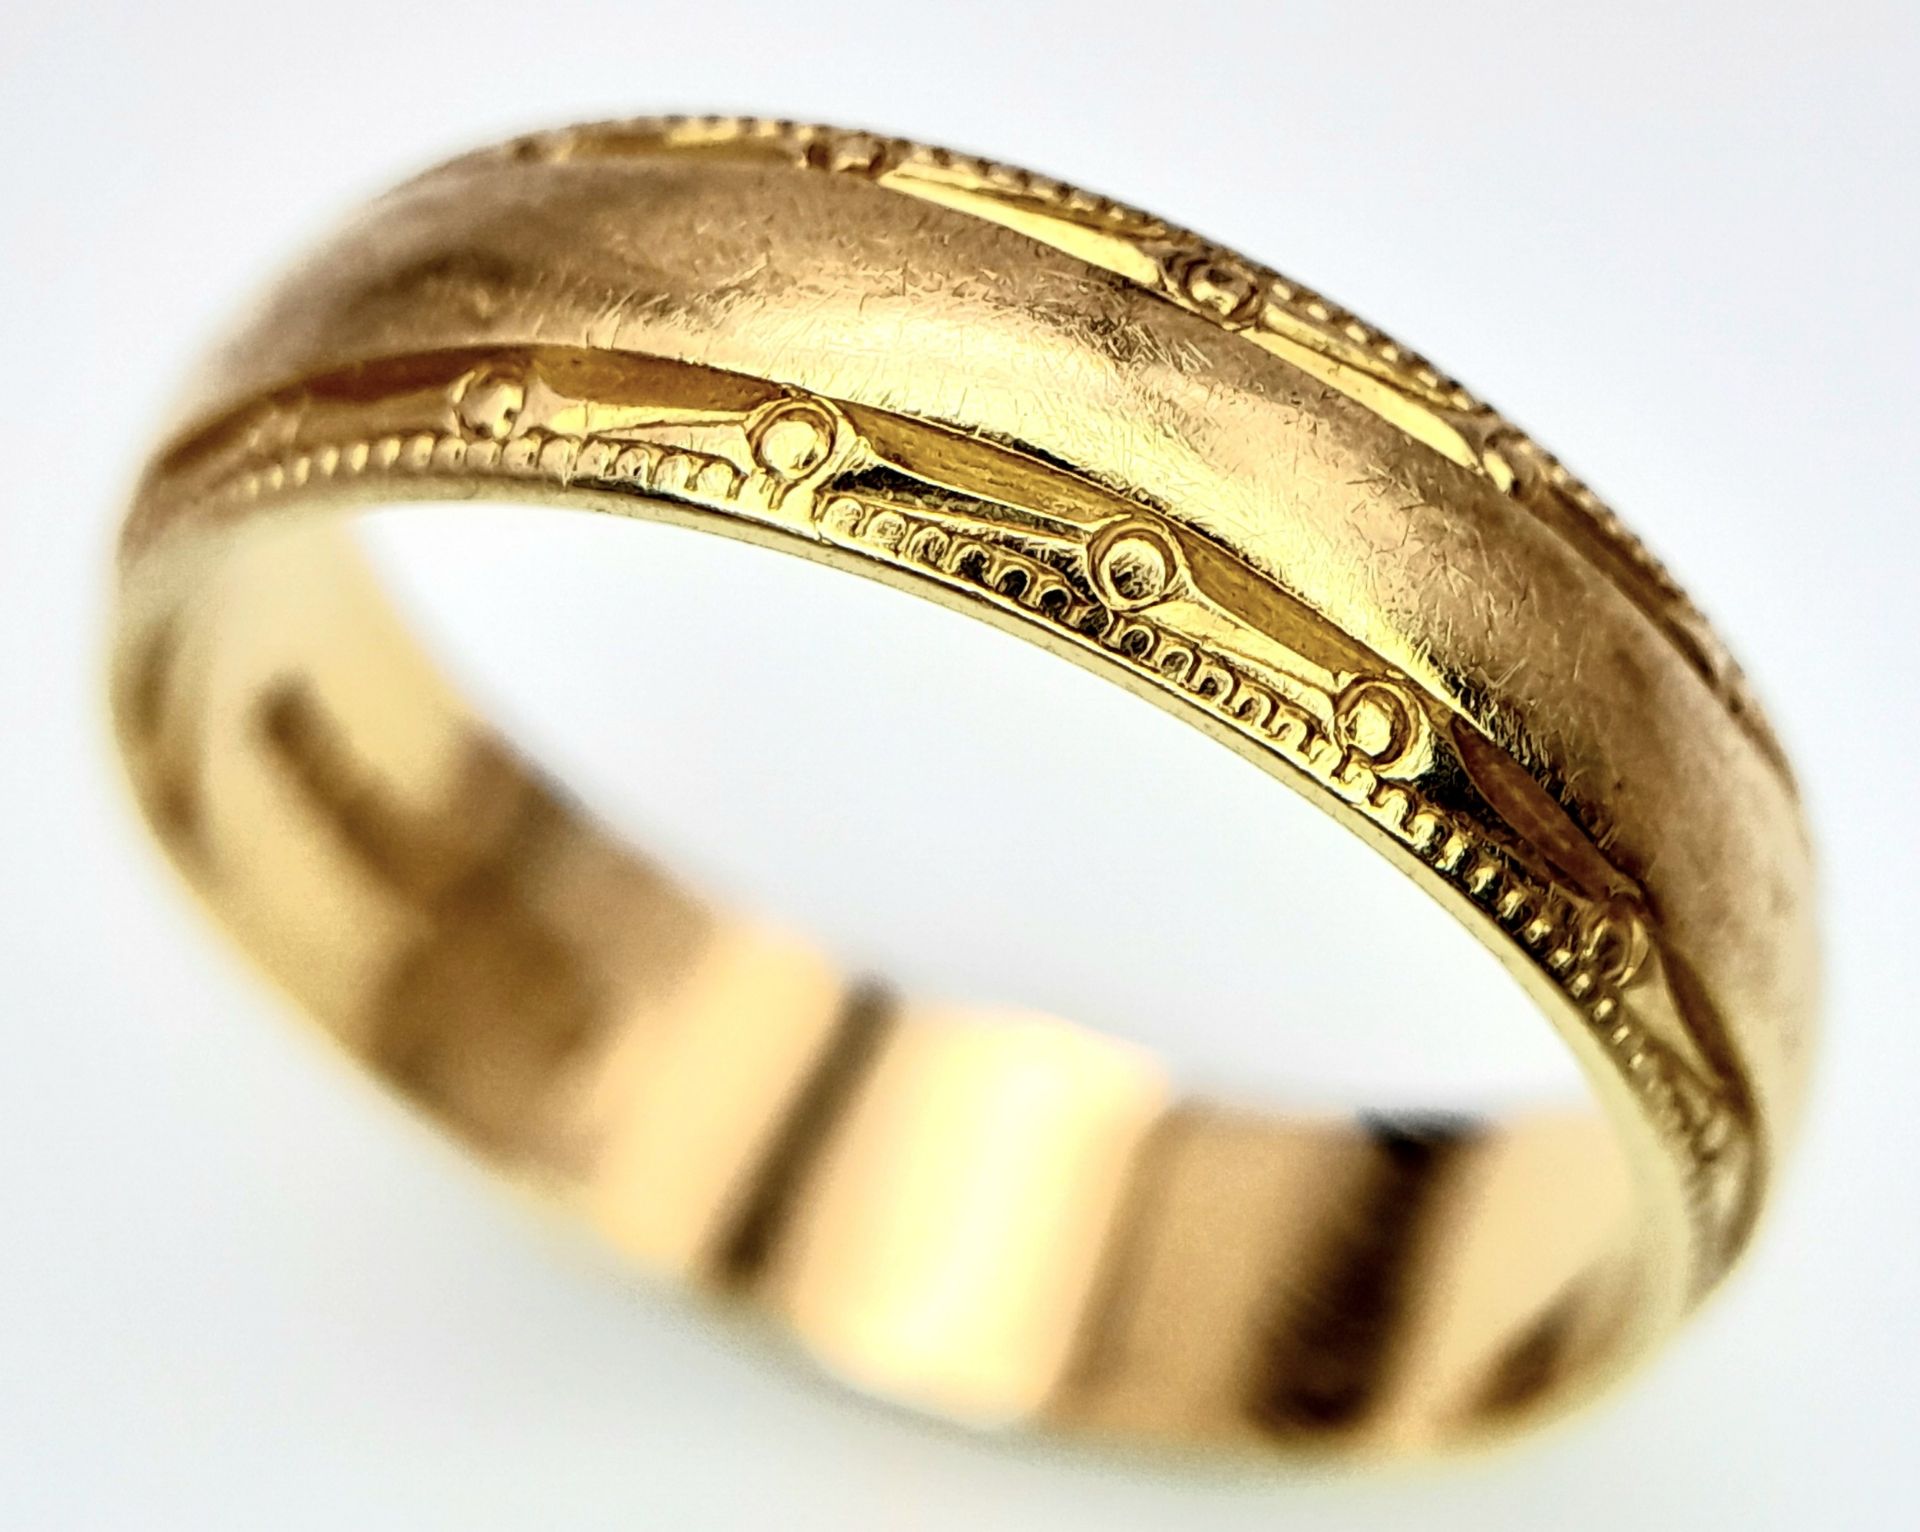 An 18 K yellow gold band ring with engraved rims. Size: M, weight: 3.5 g. - Image 4 of 5